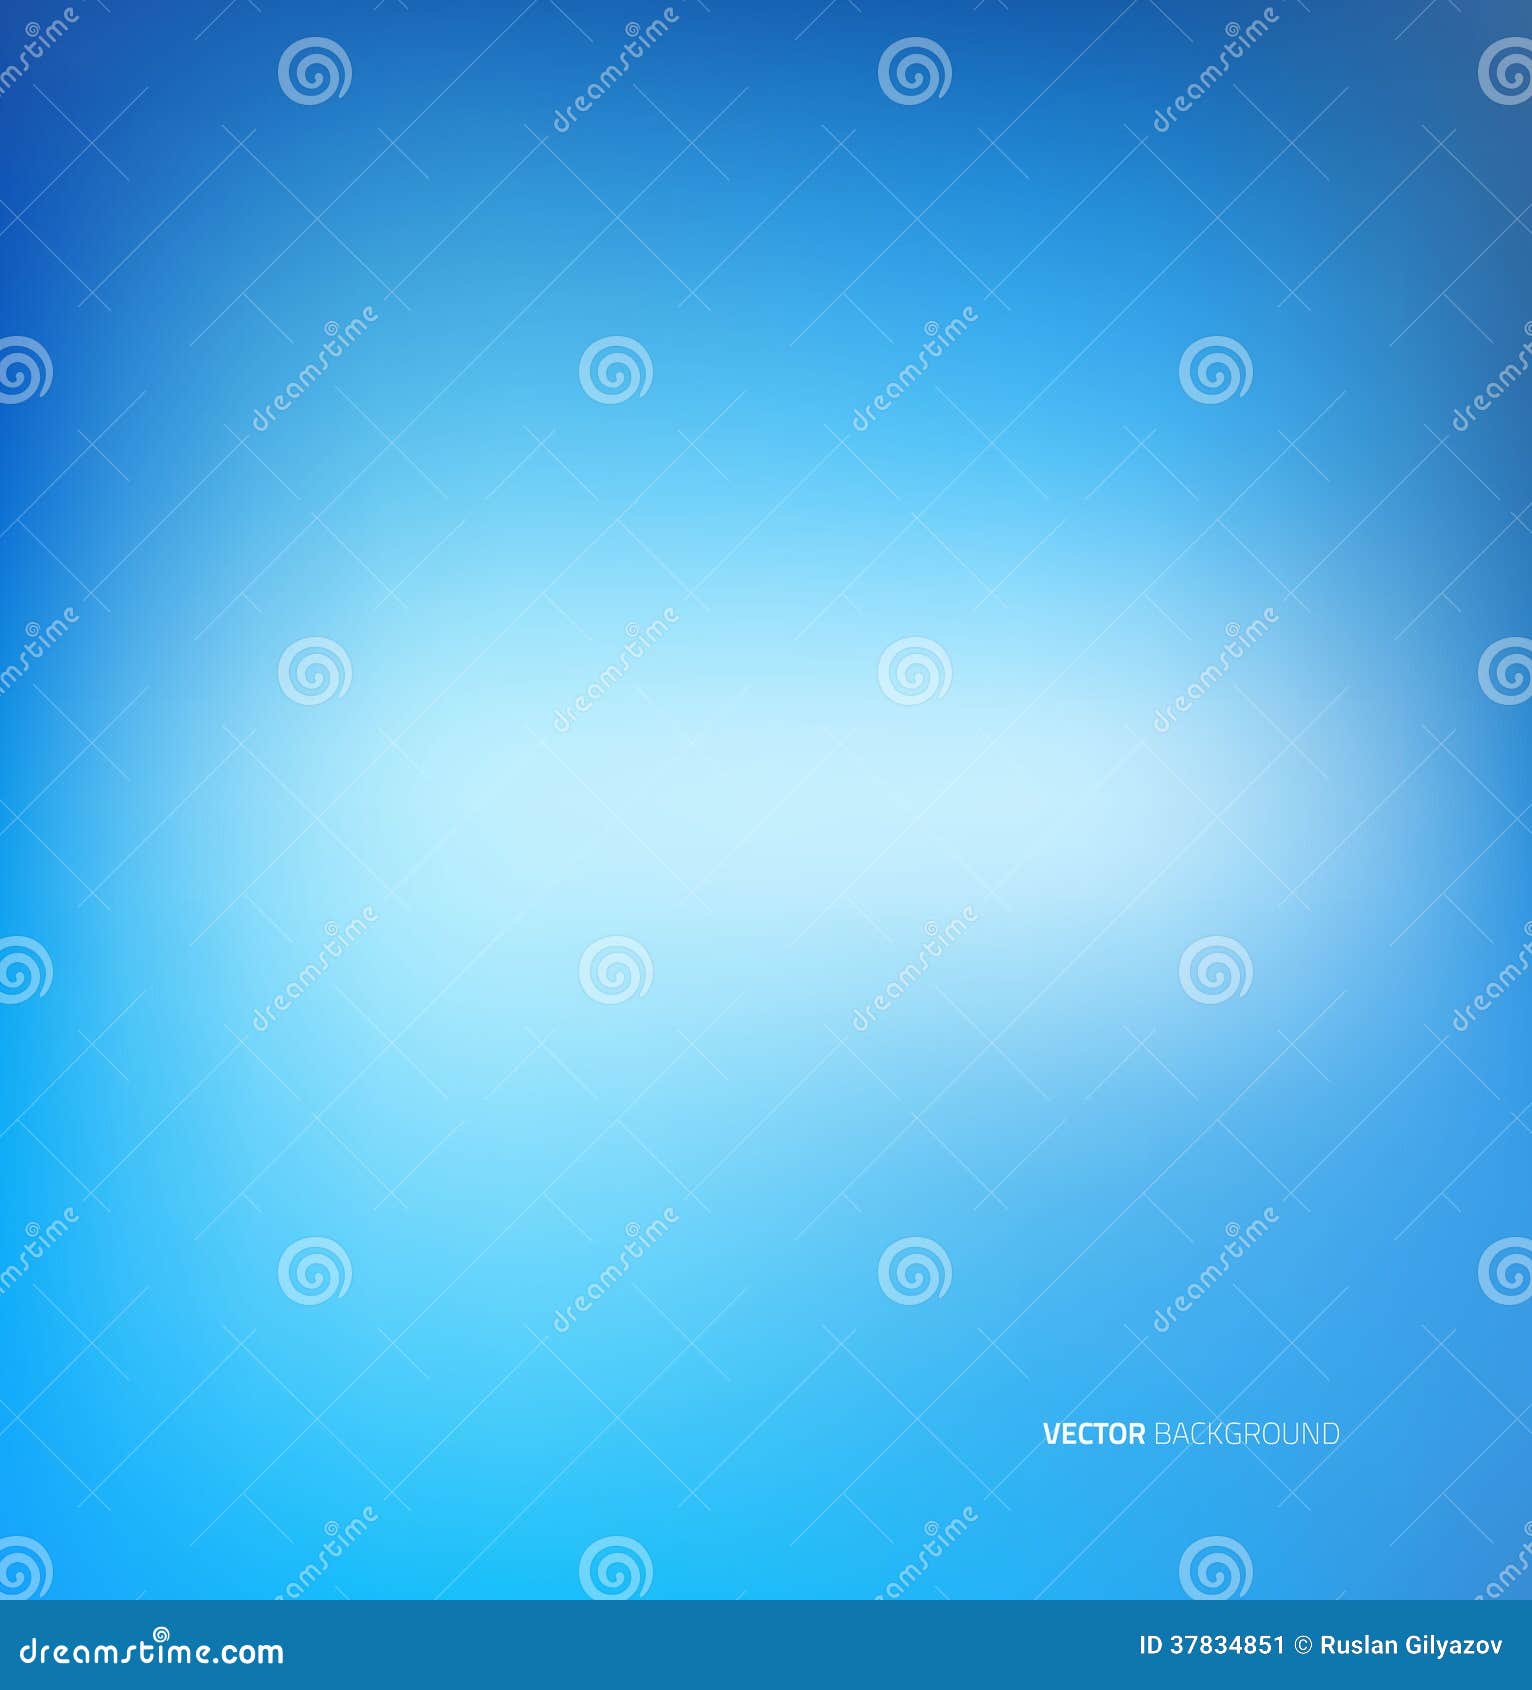 Soft Blue Abstract Background Stock Vector - Illustration of calm